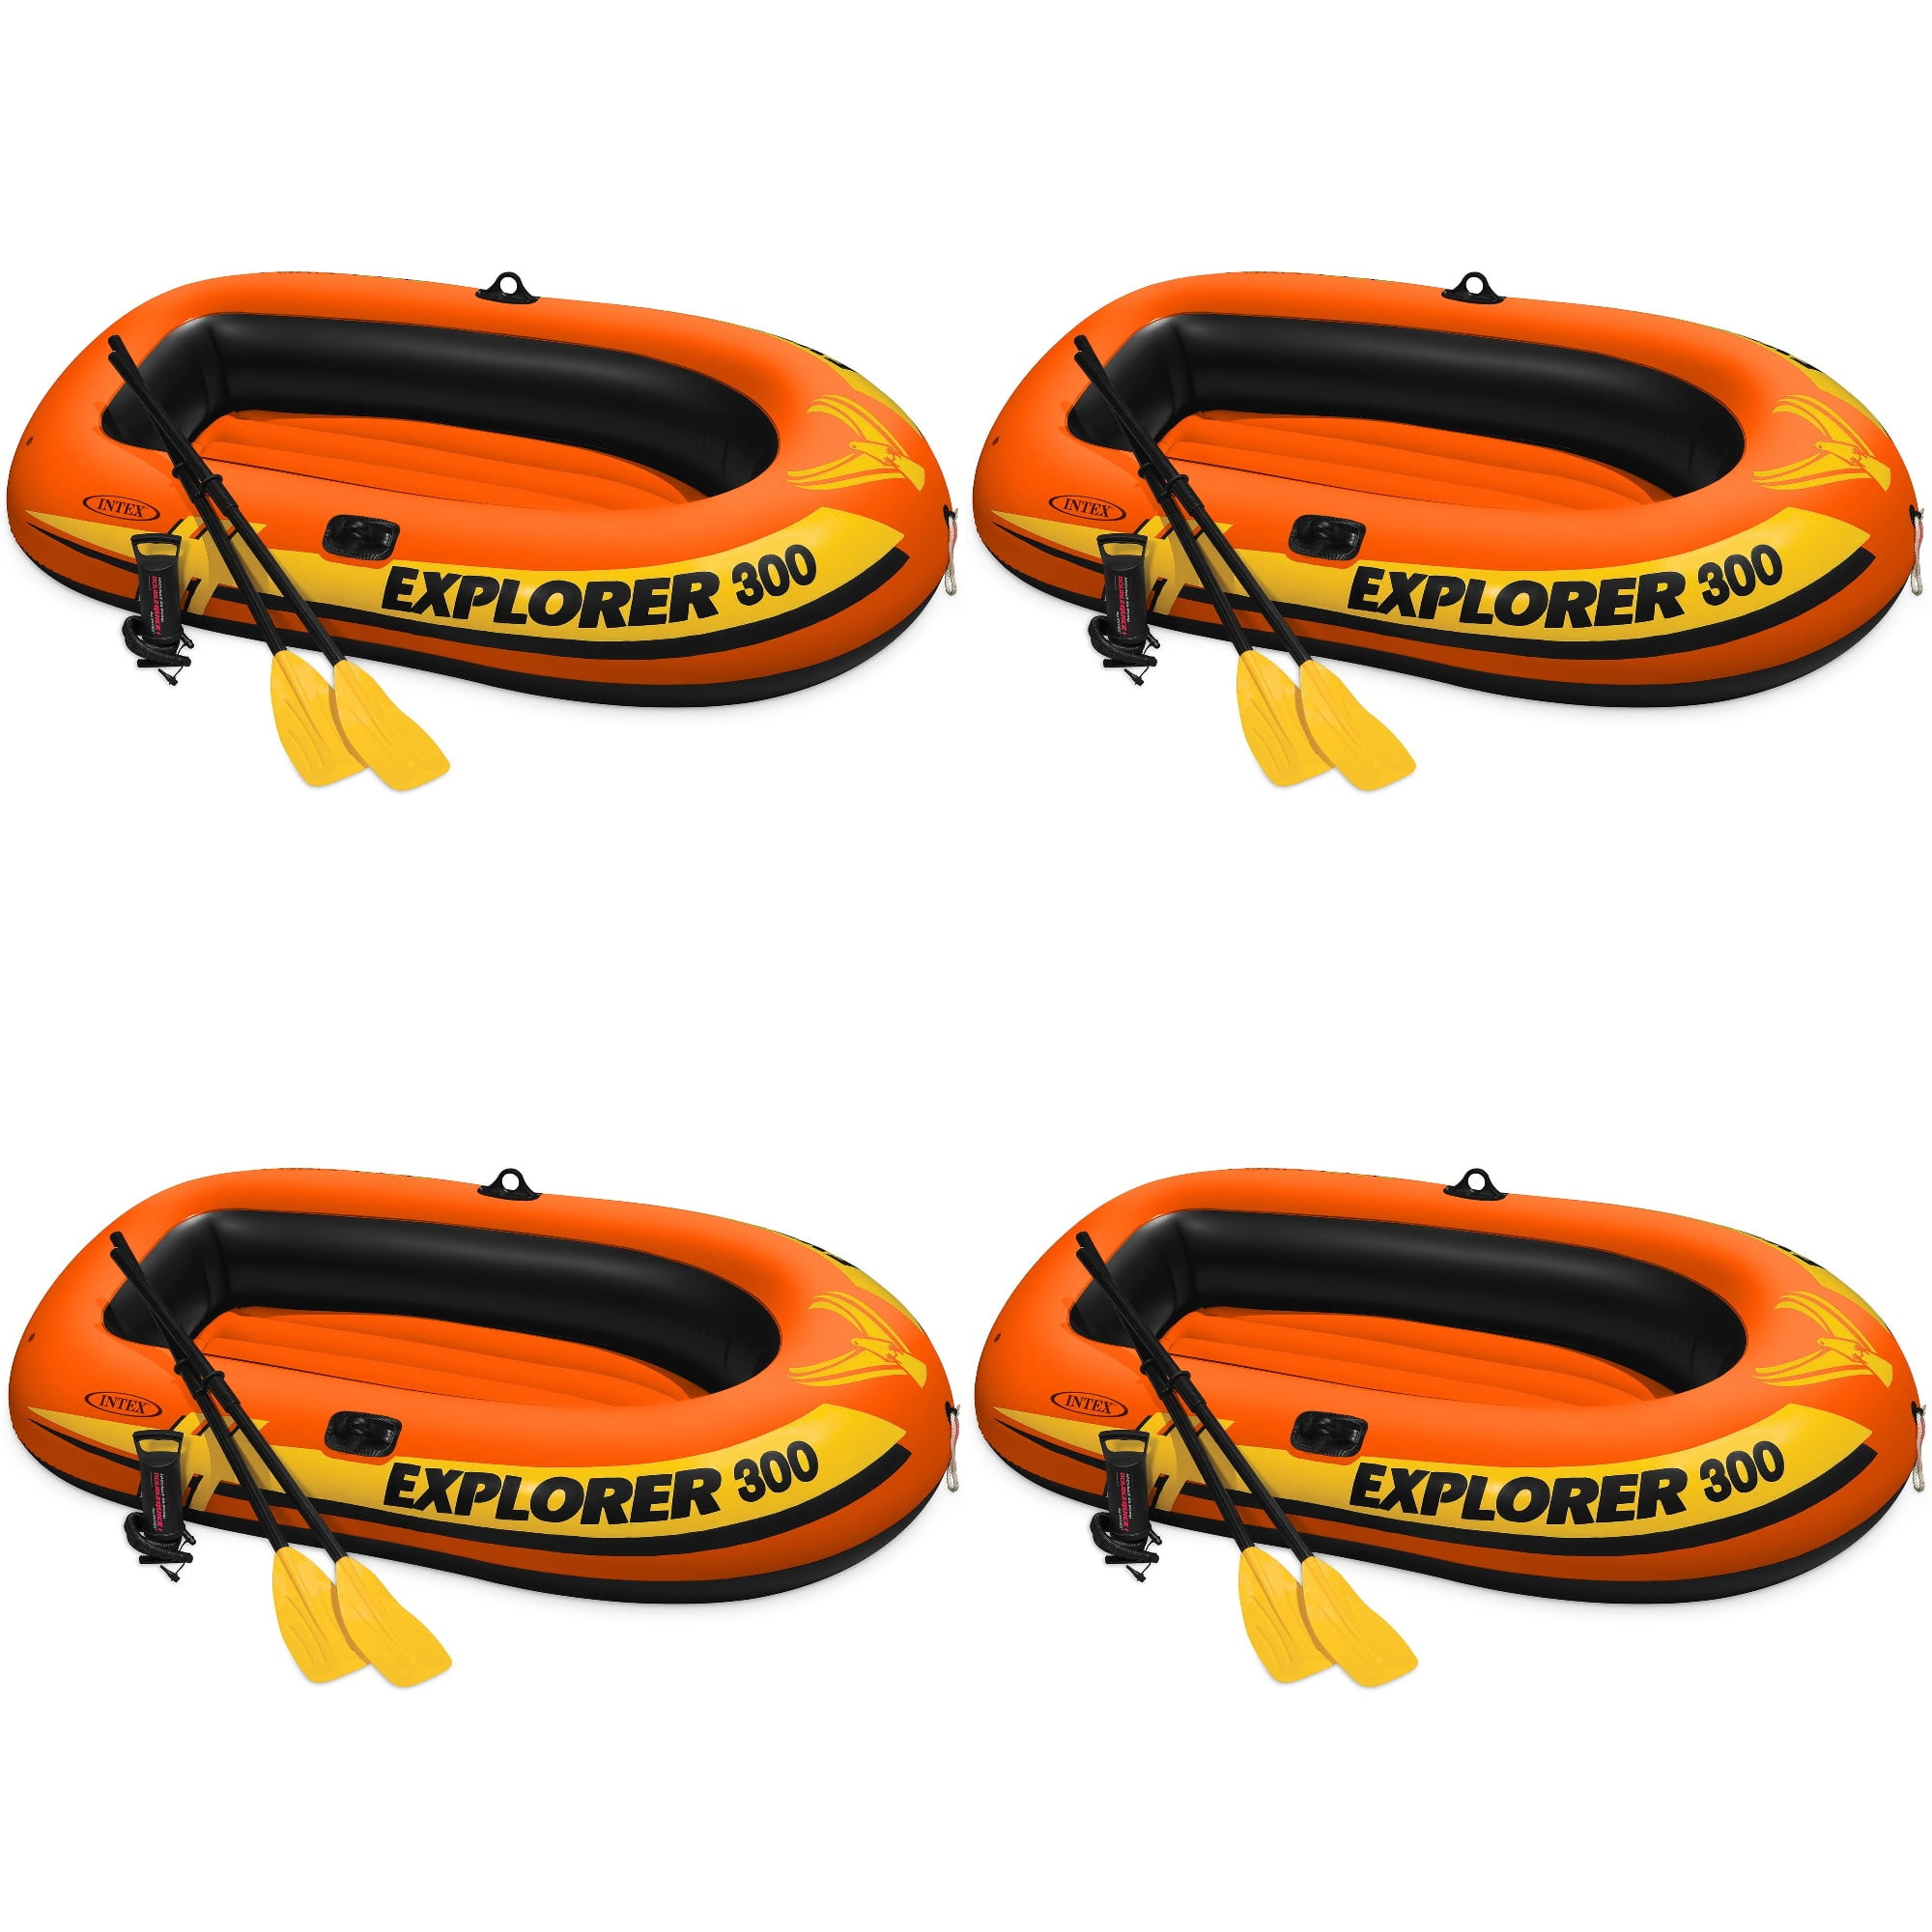 Explorer (4 3 Pump Compact Pack) Oars 300 Boat & w/ Inflatable Intex Person Raft